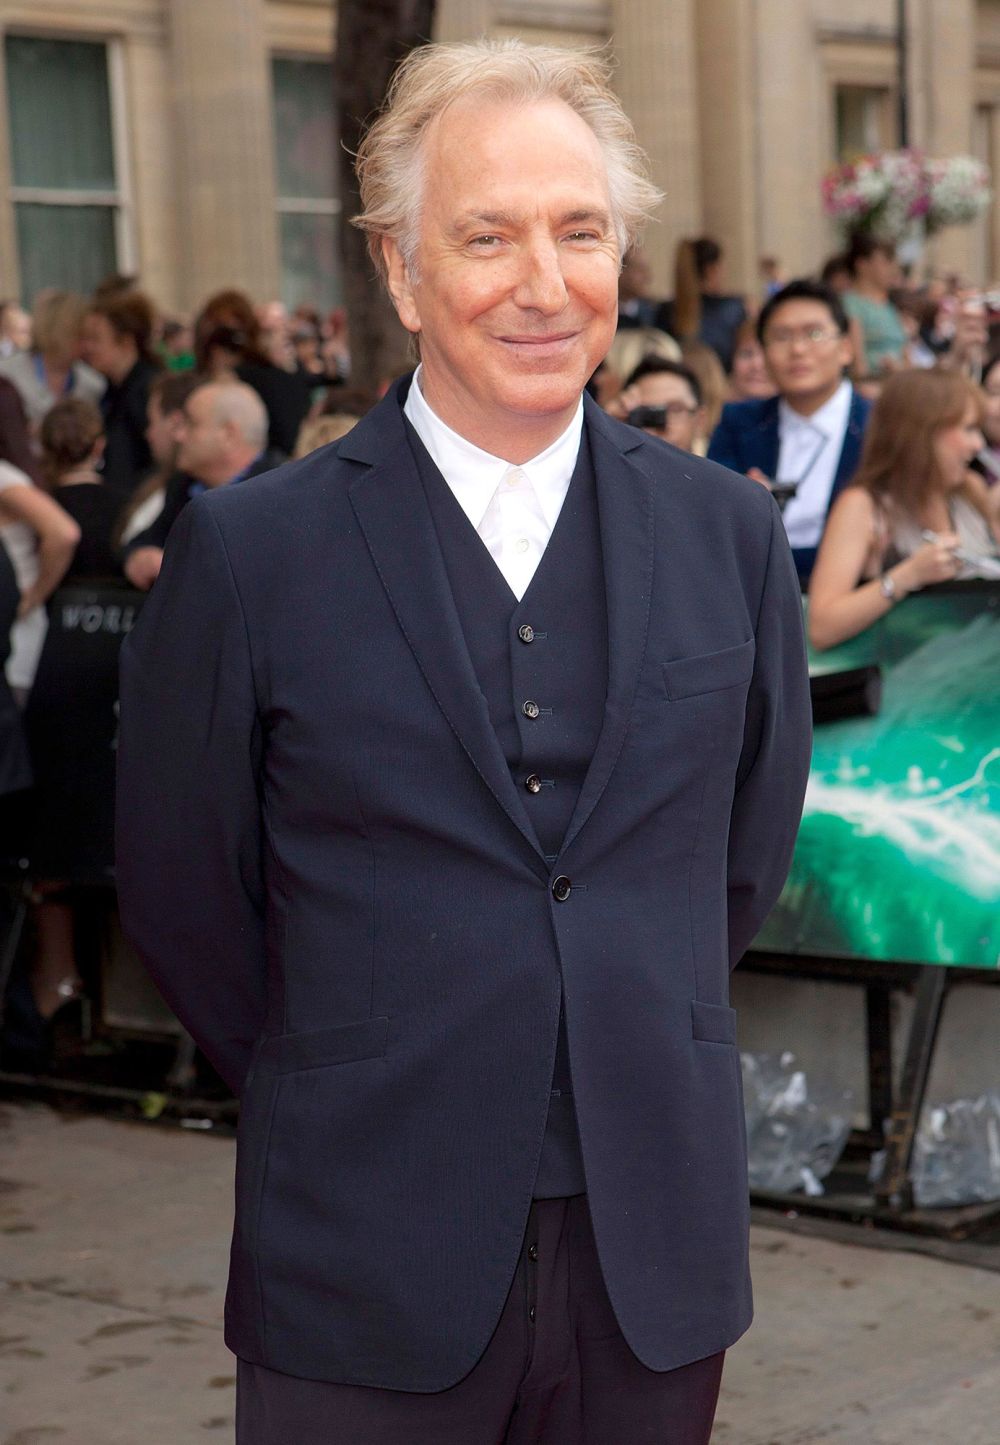 Harry Potter' star, the late Alan Rickman, wanted to quit franchise,  journals reveal